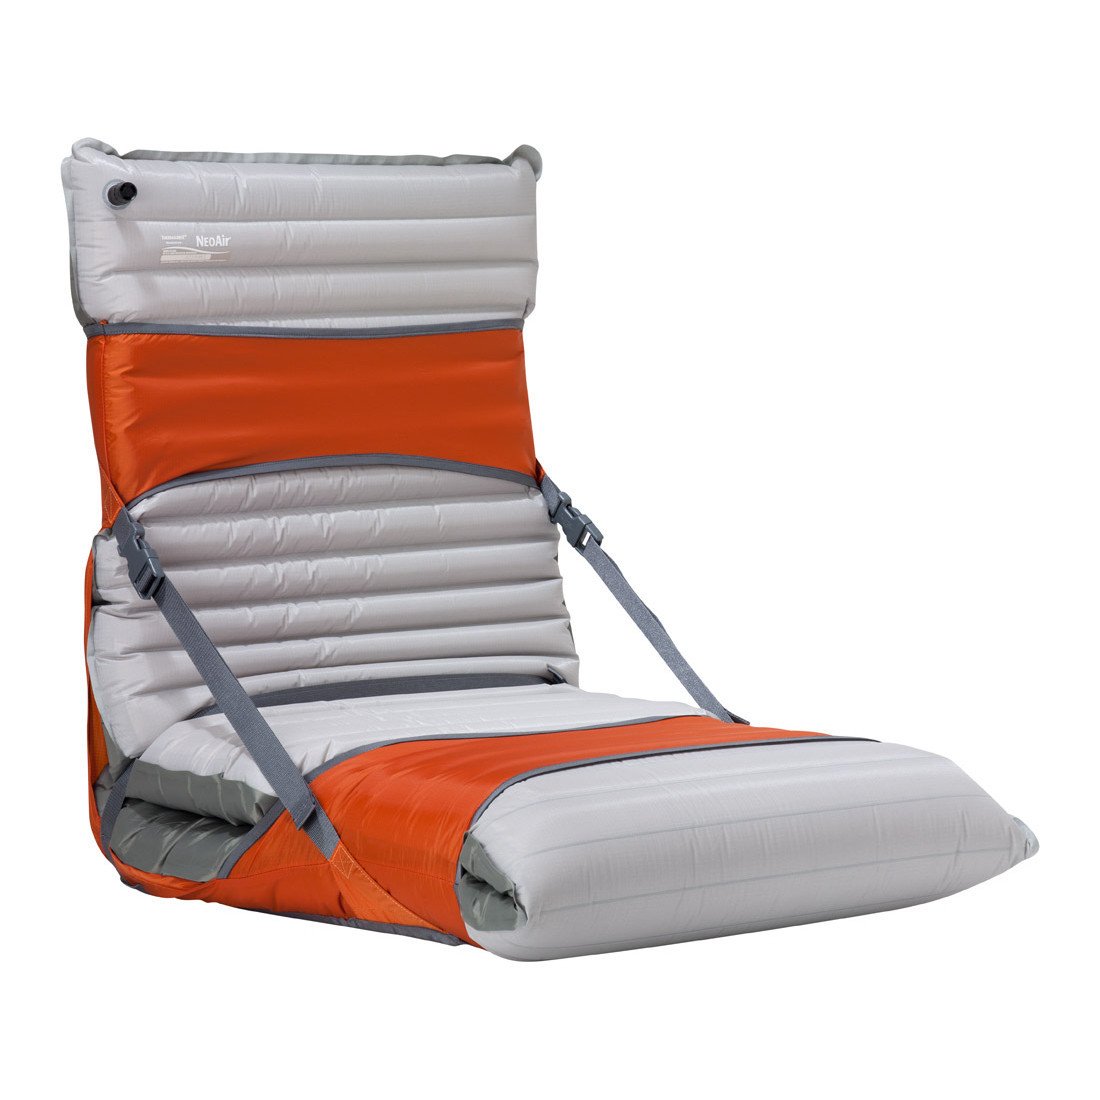 Thermarest Trekker Chair Kit 25, shown in use with a grey sleeping mat, kit in orange colour